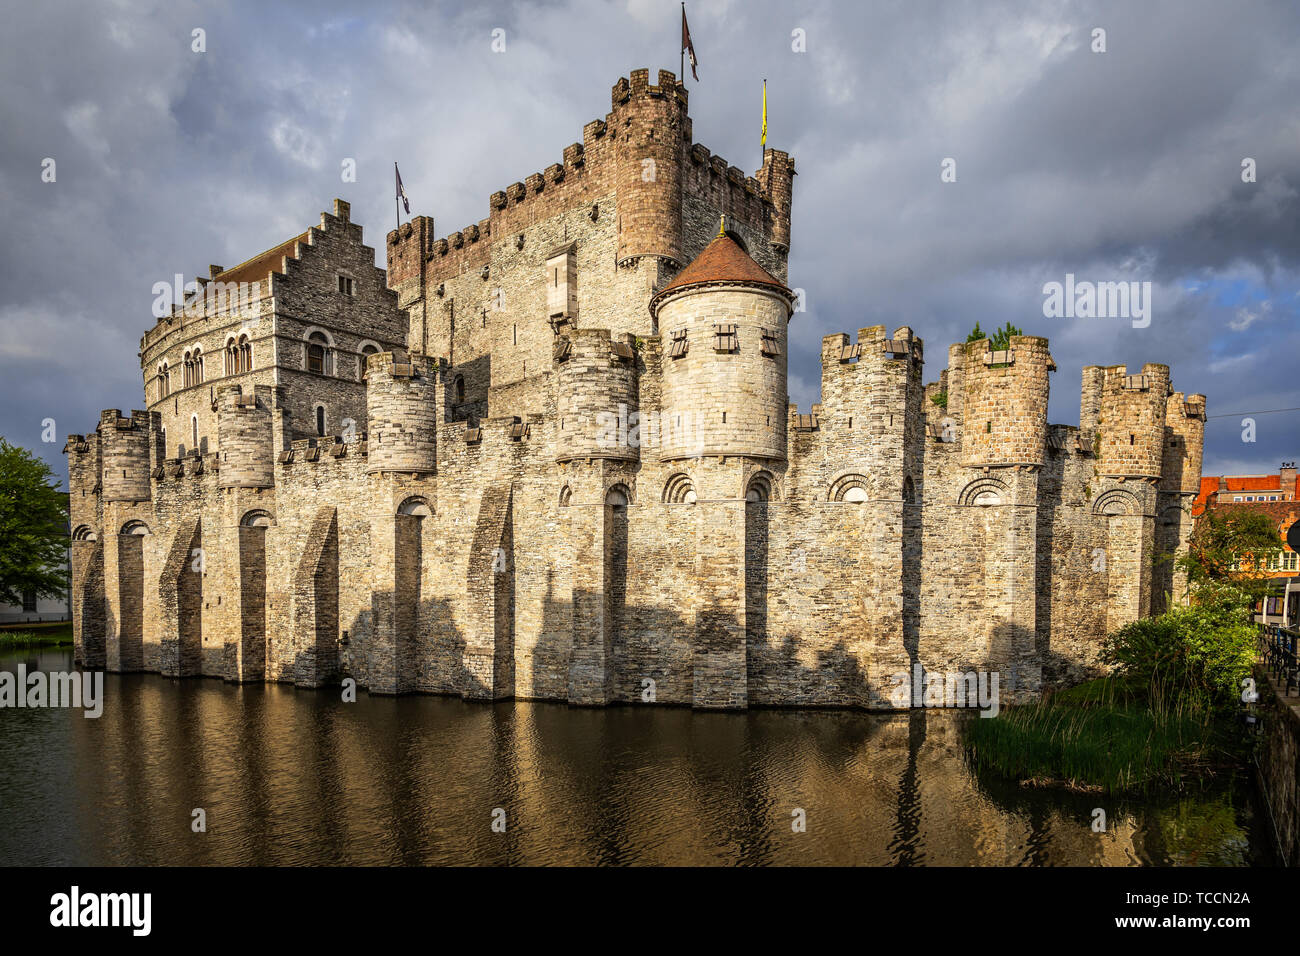 Fortified walls and towers of Gravensteen medieval castle with moat in the foreground, Ghent East Flanders, Belgium Stock Photo